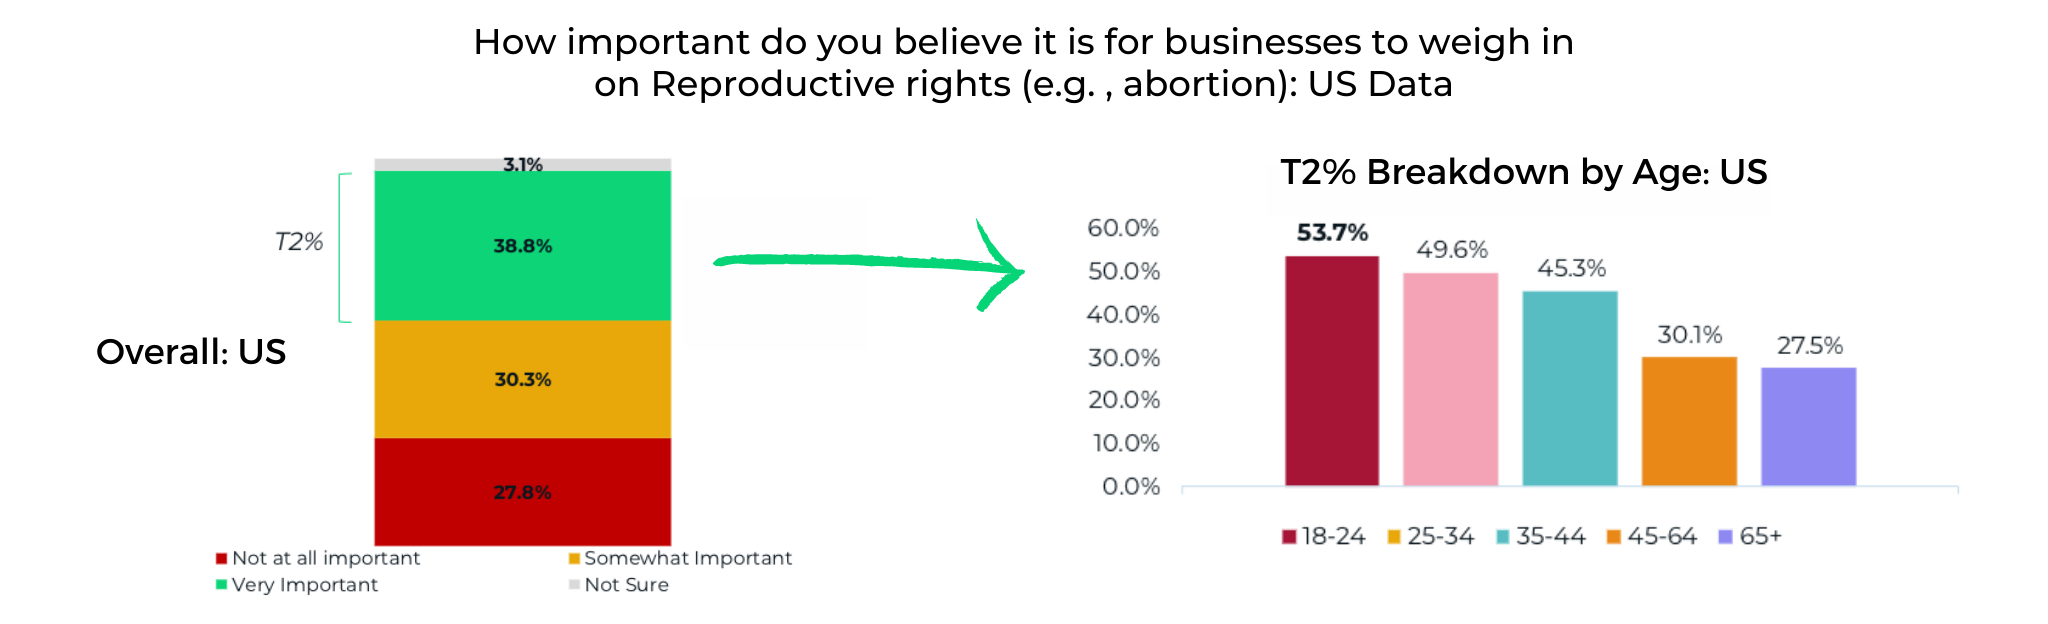 How important for businesses to weigh in on reproductive rights? US Data